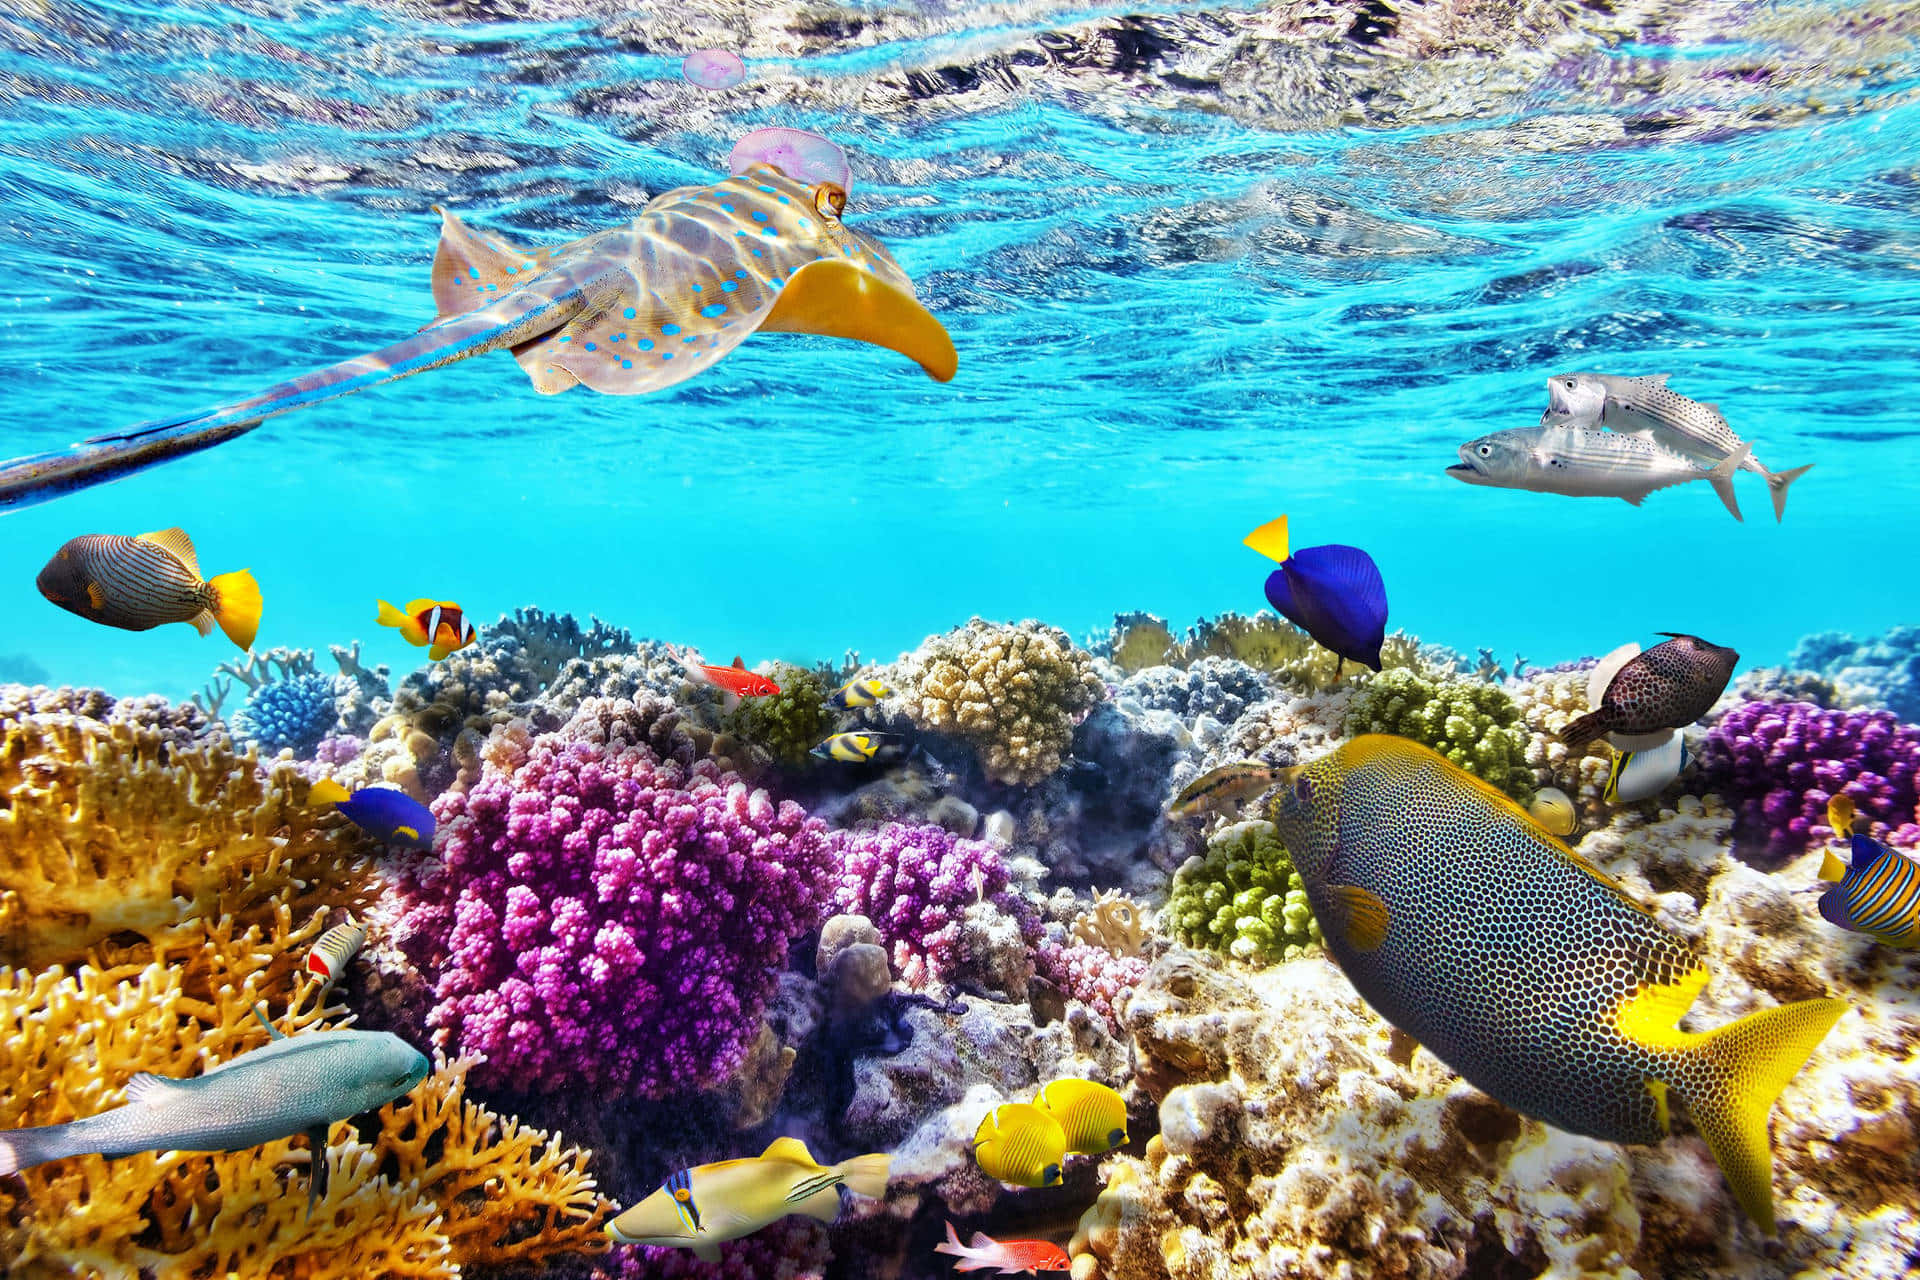 Admire the vivid colors and beauty of a coral reef